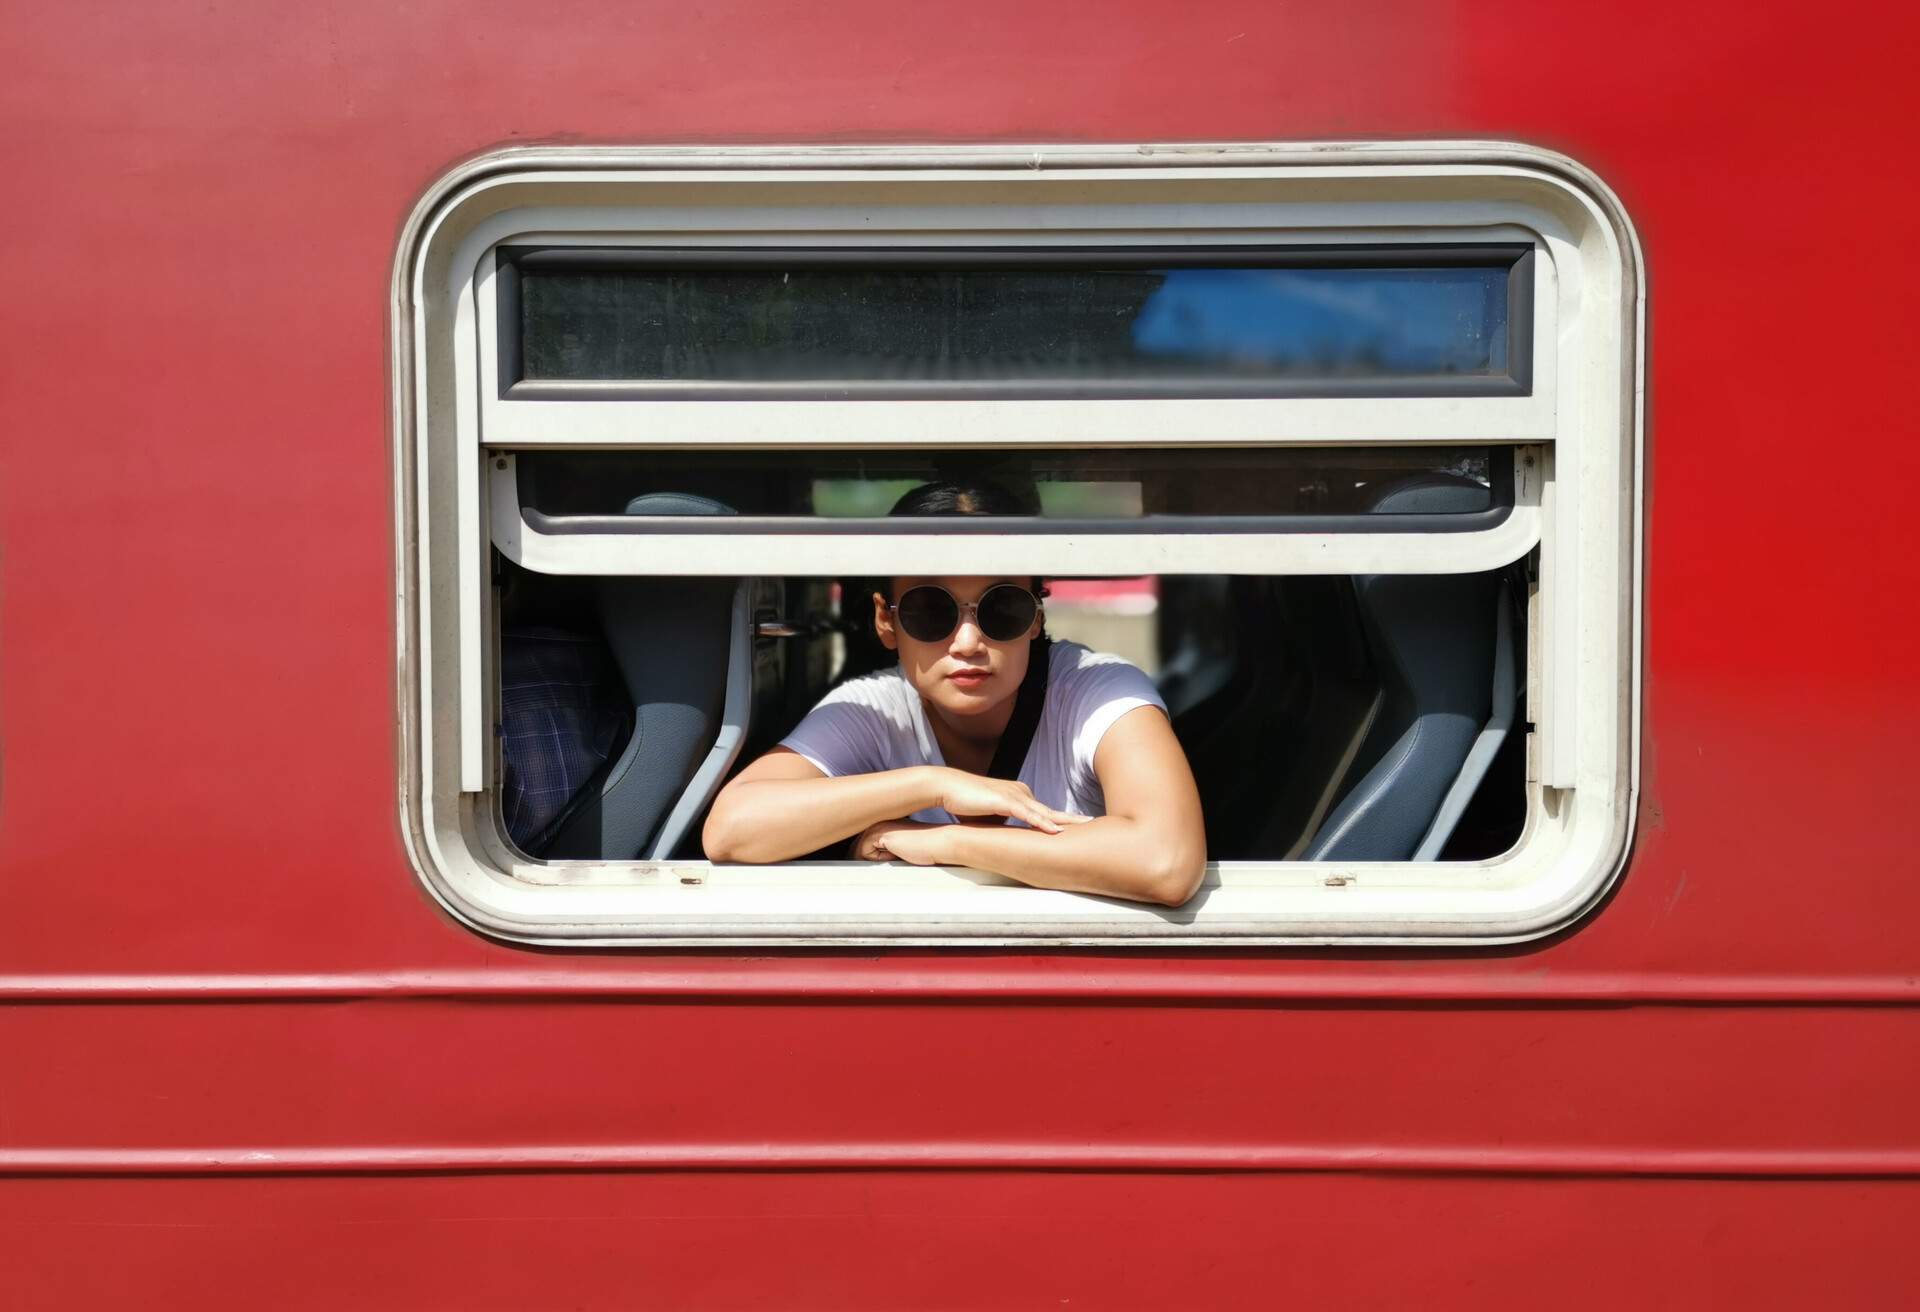 THEME_TRAIN_WOMAN_GettyImages-1197453023-14.jpg